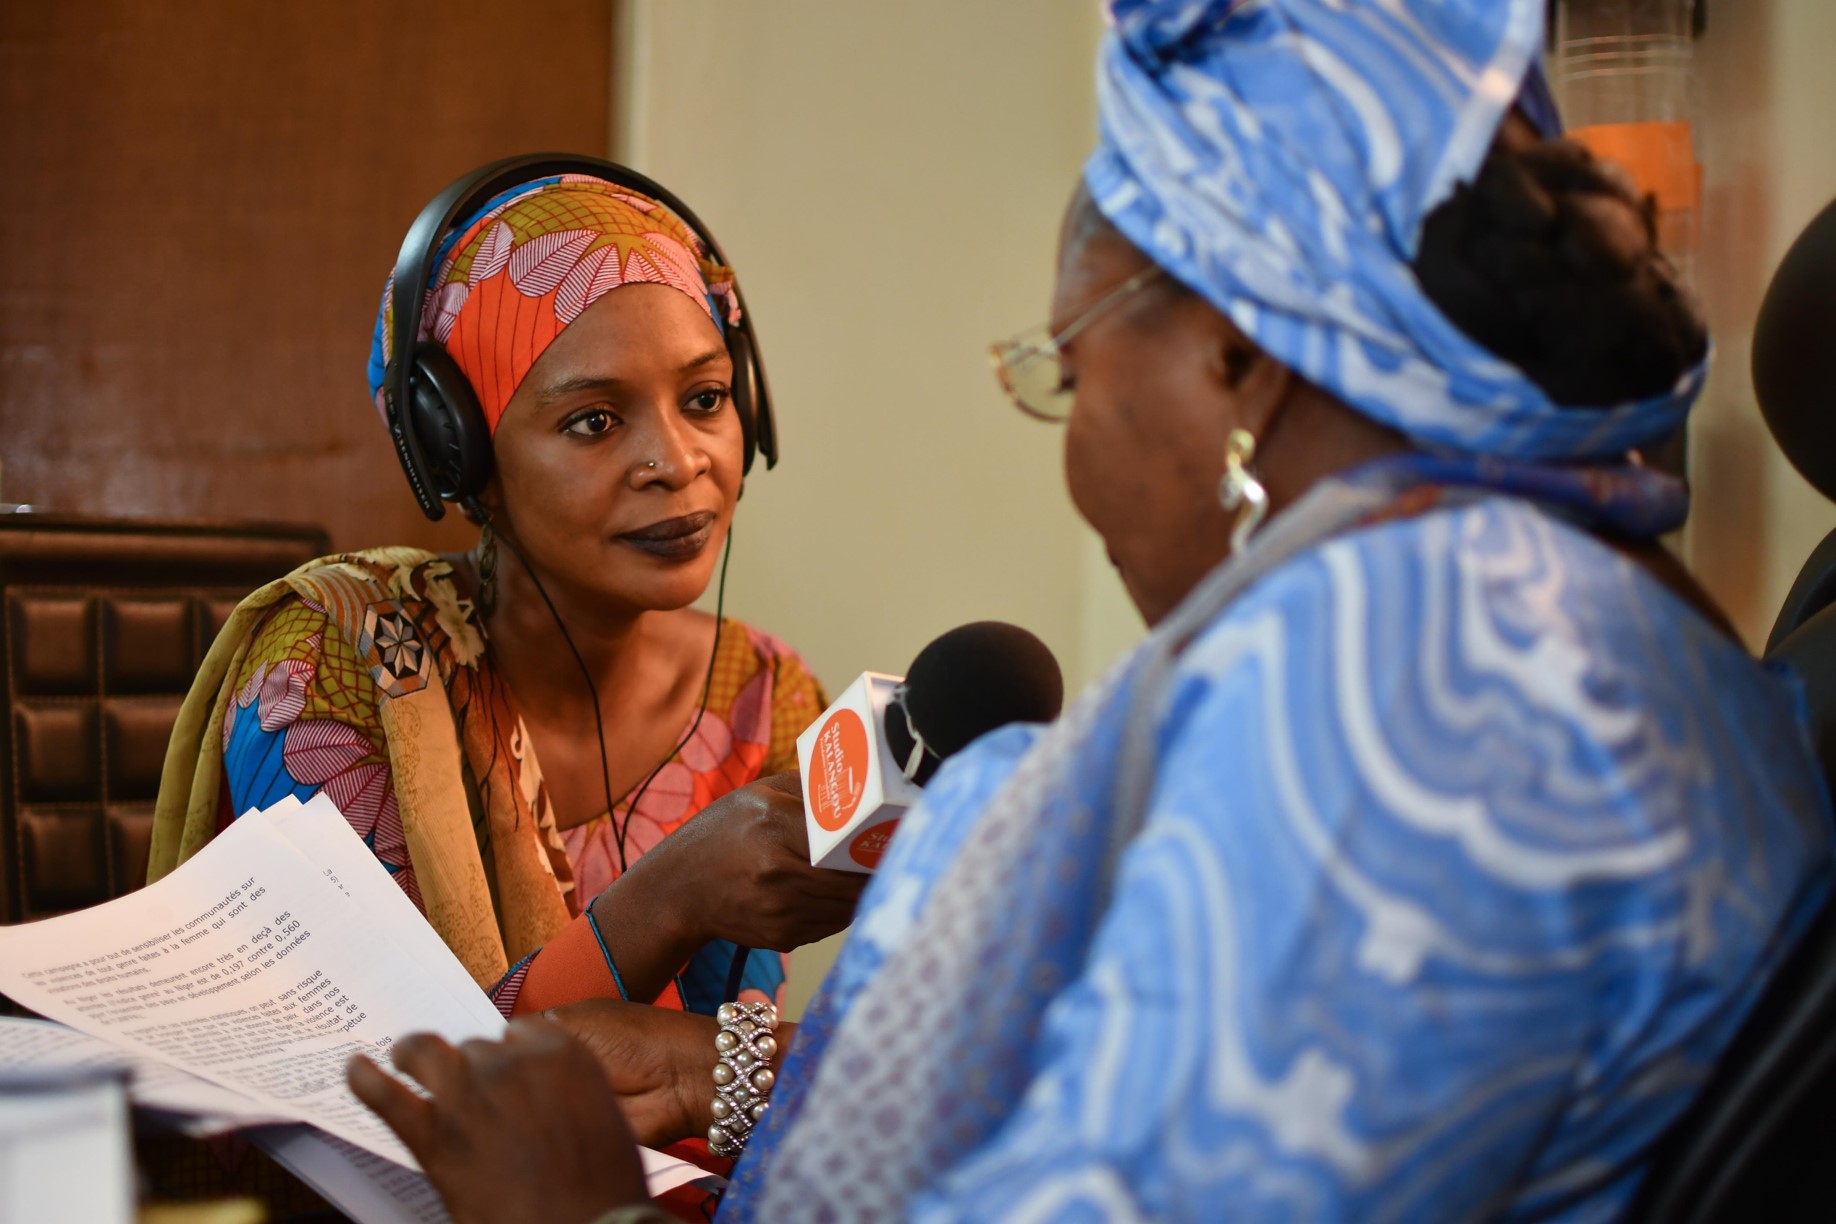  An African woman holds a microphone as she interviews another woman in a radio studio.